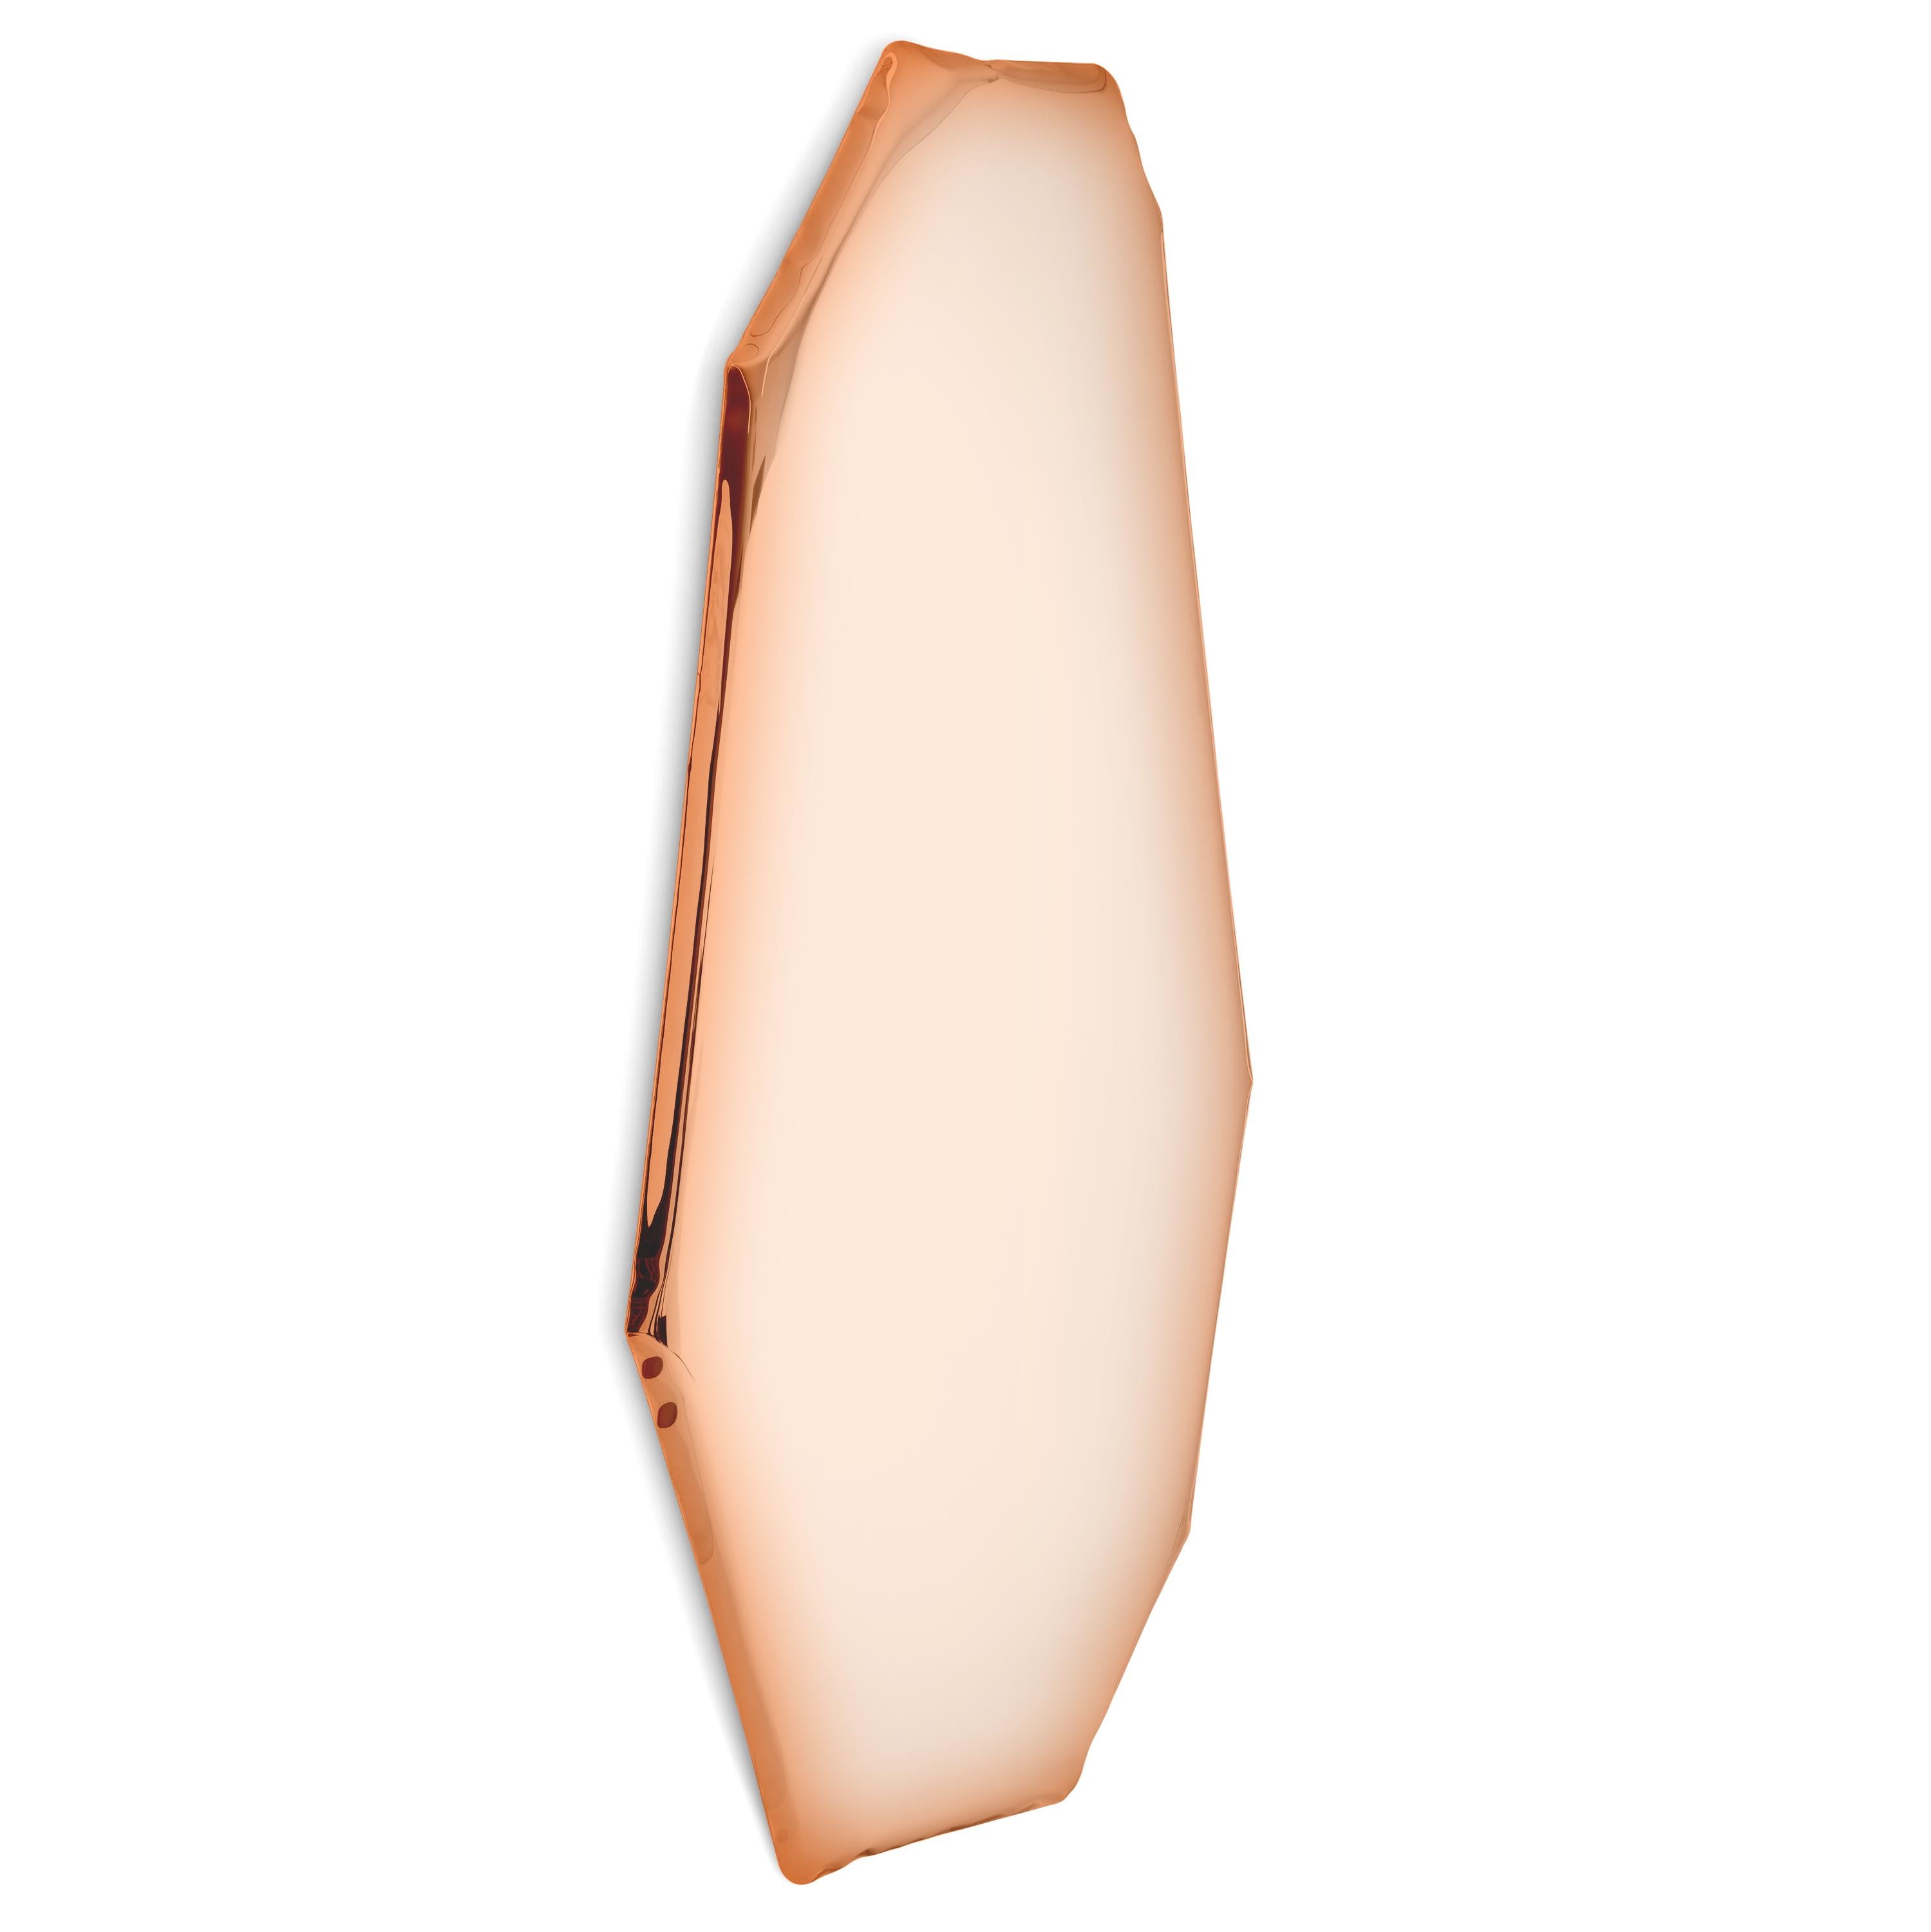 Rose Gold Tafla C1 Sculptural wall mirror by Zieta
Dimensions: D 6 x W 99 x H 225 cm 
Material: Stainless steel. 
Finish: Rose gold. 
Available in finishes: Stainless Steel, Deep Space Blue, Emerald, Sapphire, Sapphire/Emerald, Dark Matter, Red